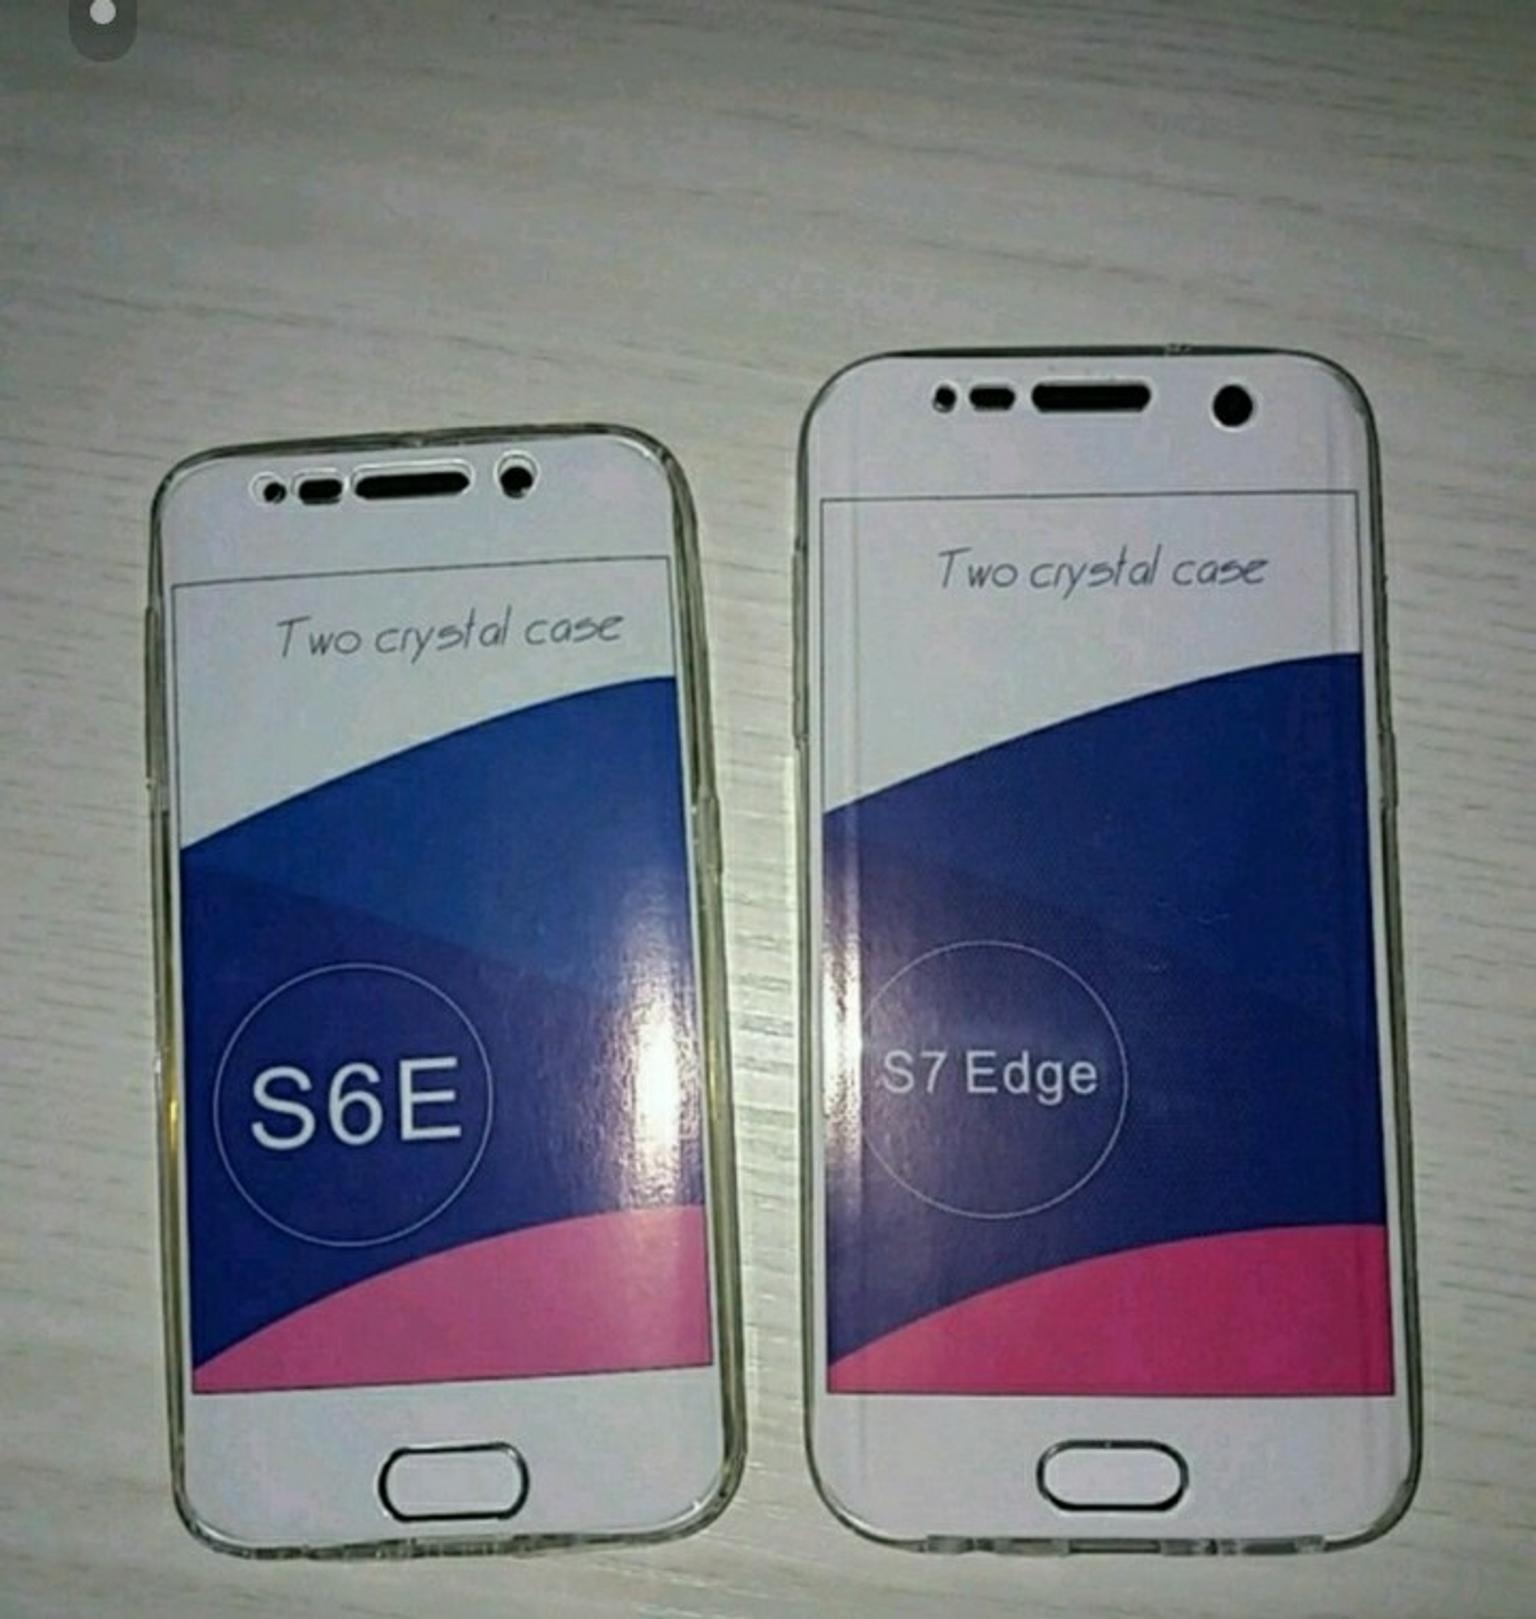 Two Crystal case S6E/S7 Edge in 20032 Cormano for €20.00 for sale 